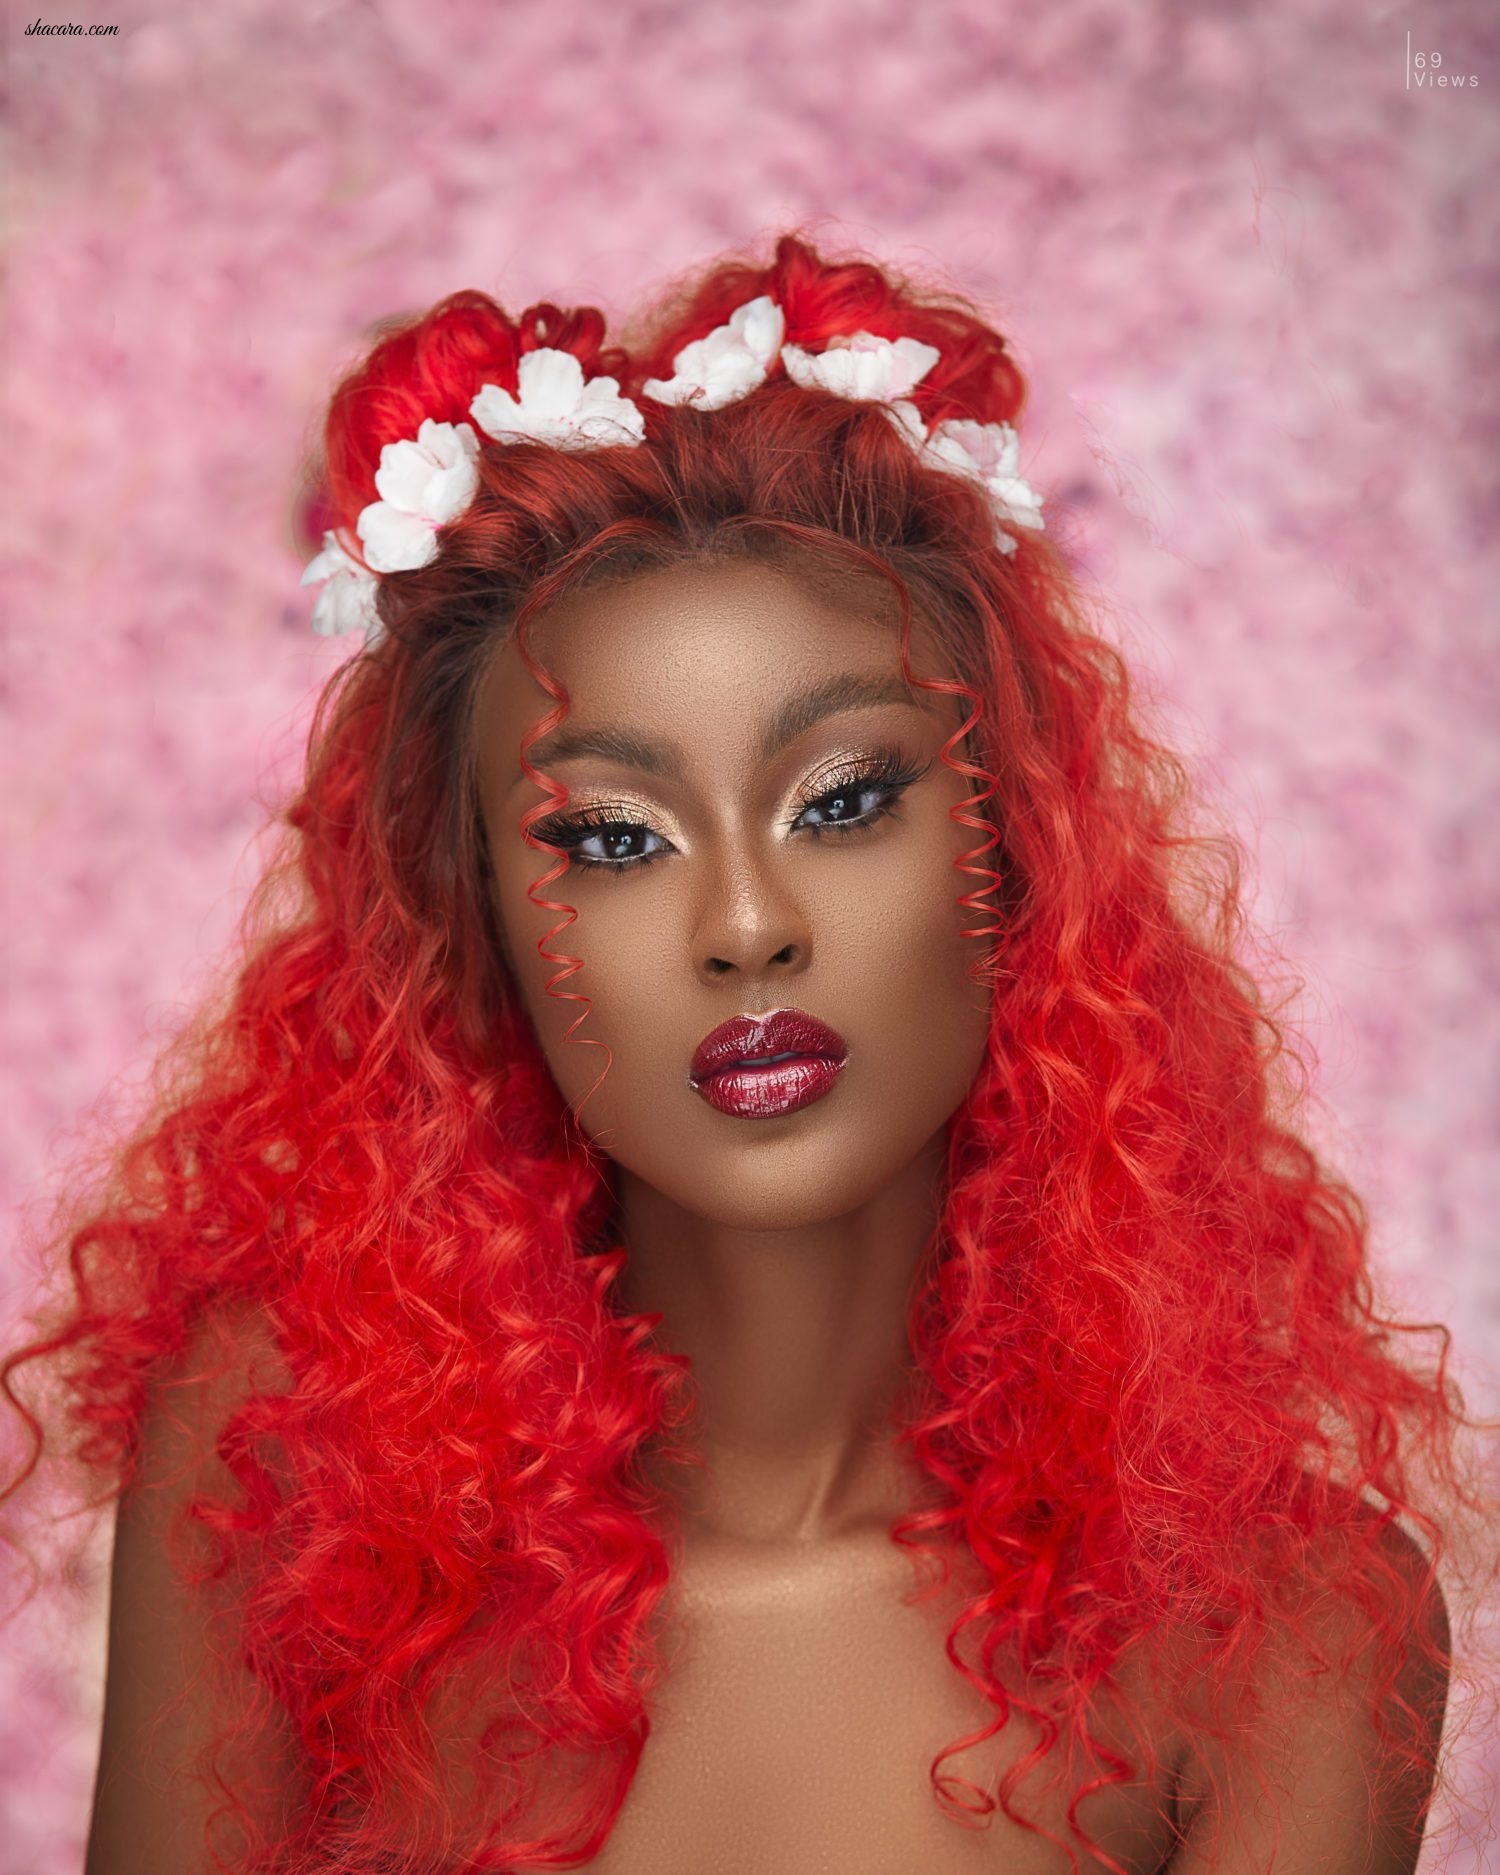 This Fairytale Beauty Editorial Will Have You Feeling Colourful